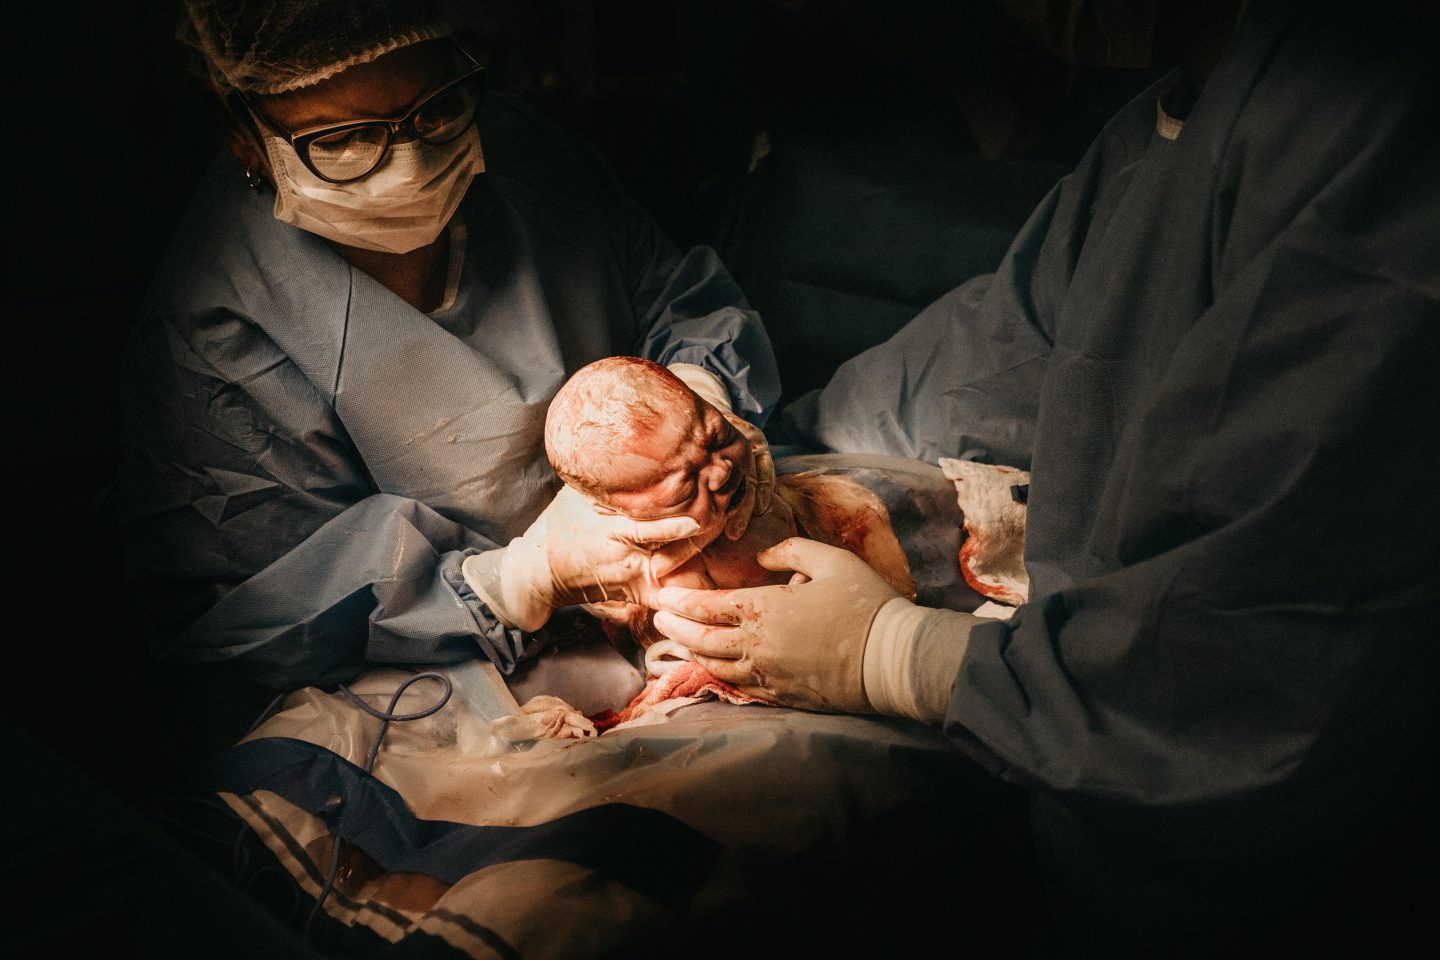 c-section woman giving birth